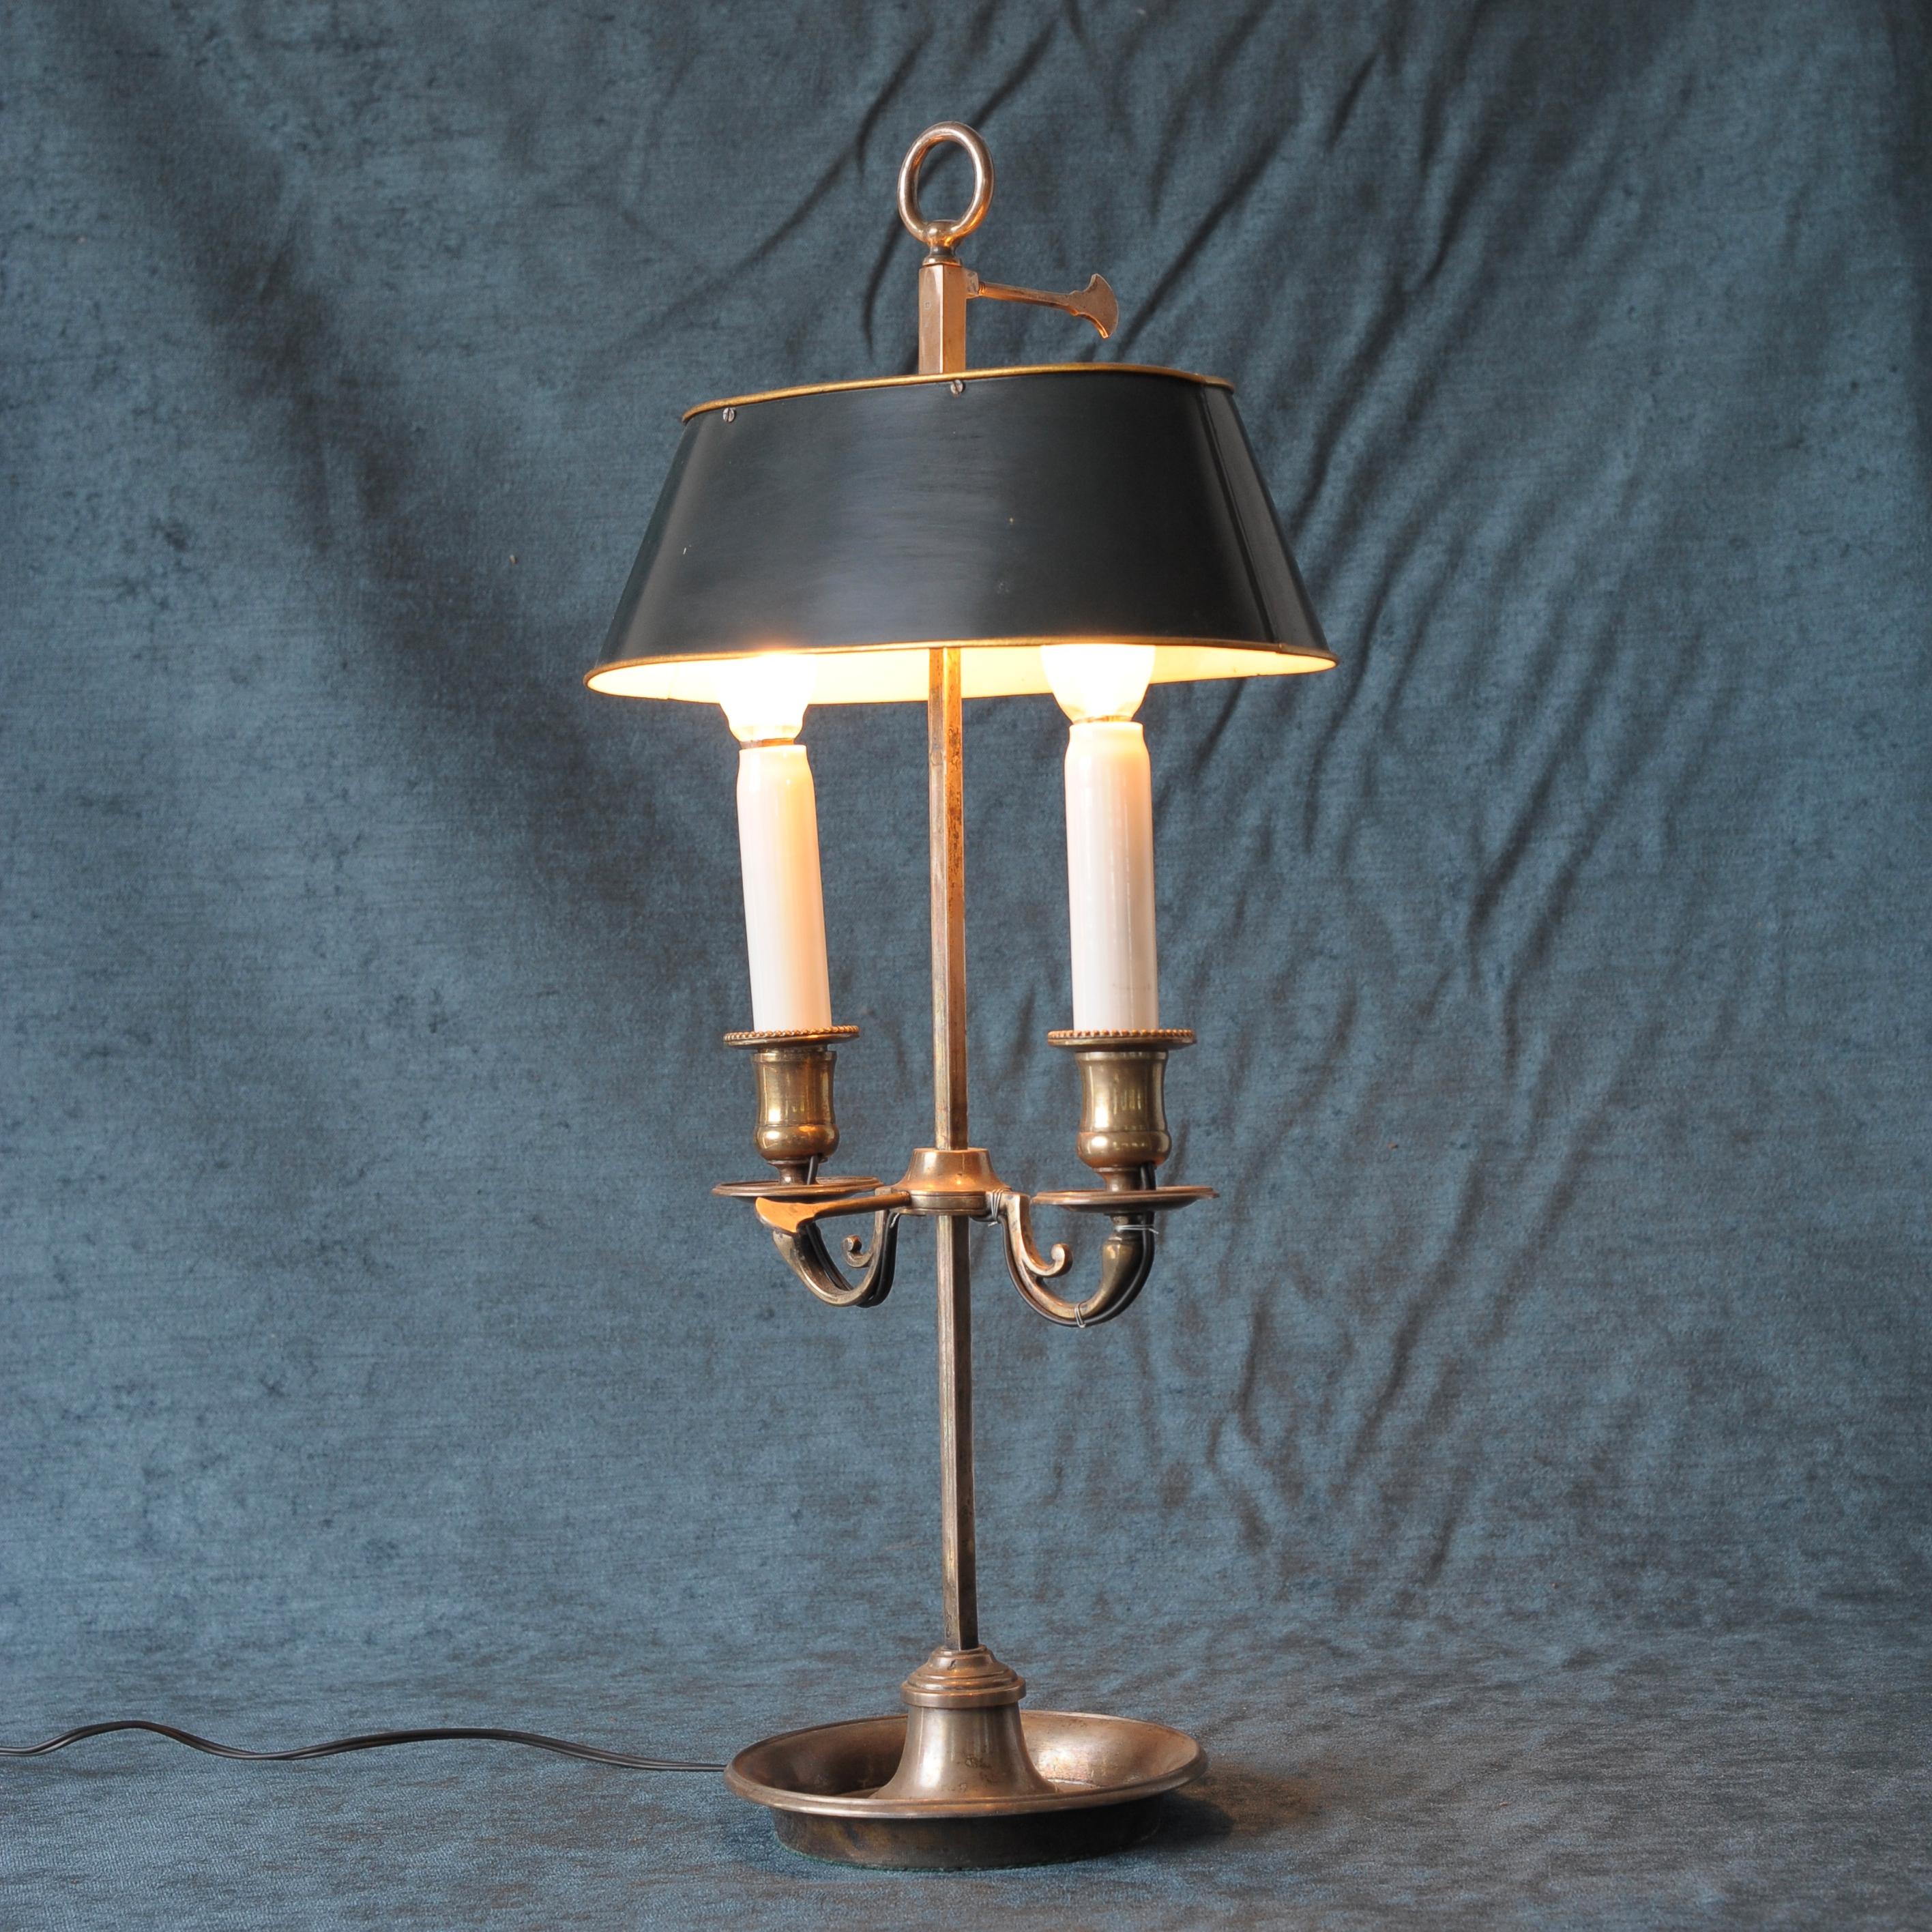 Early 20th century electrified two-light lamp in good original condition.